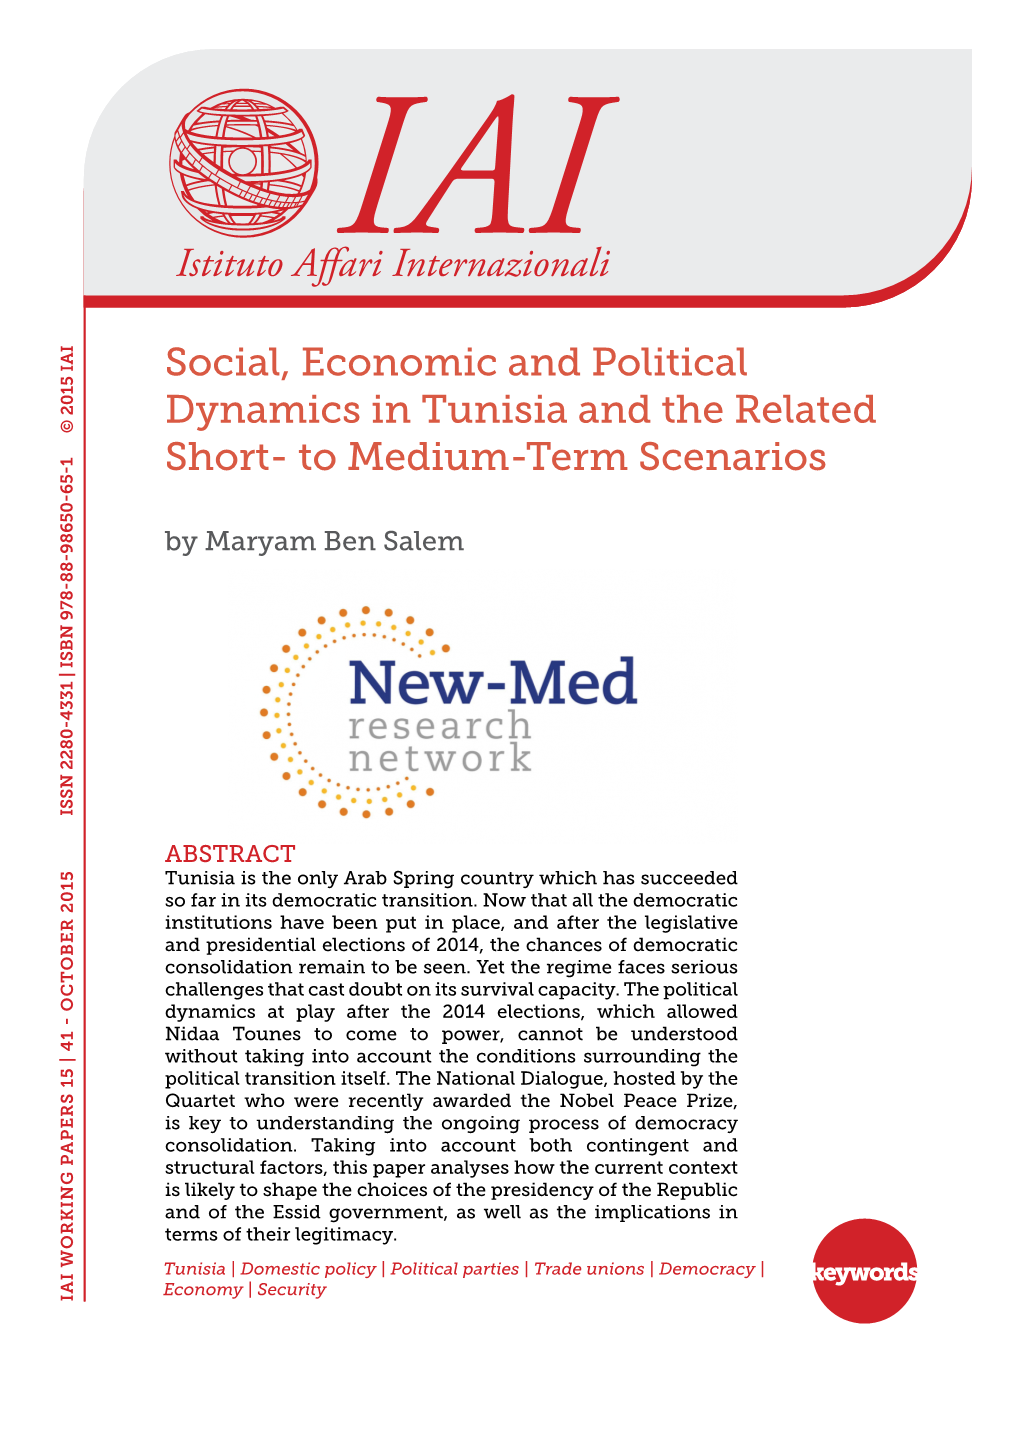 Social, Economic and Political Dynamics in Tunisia and The